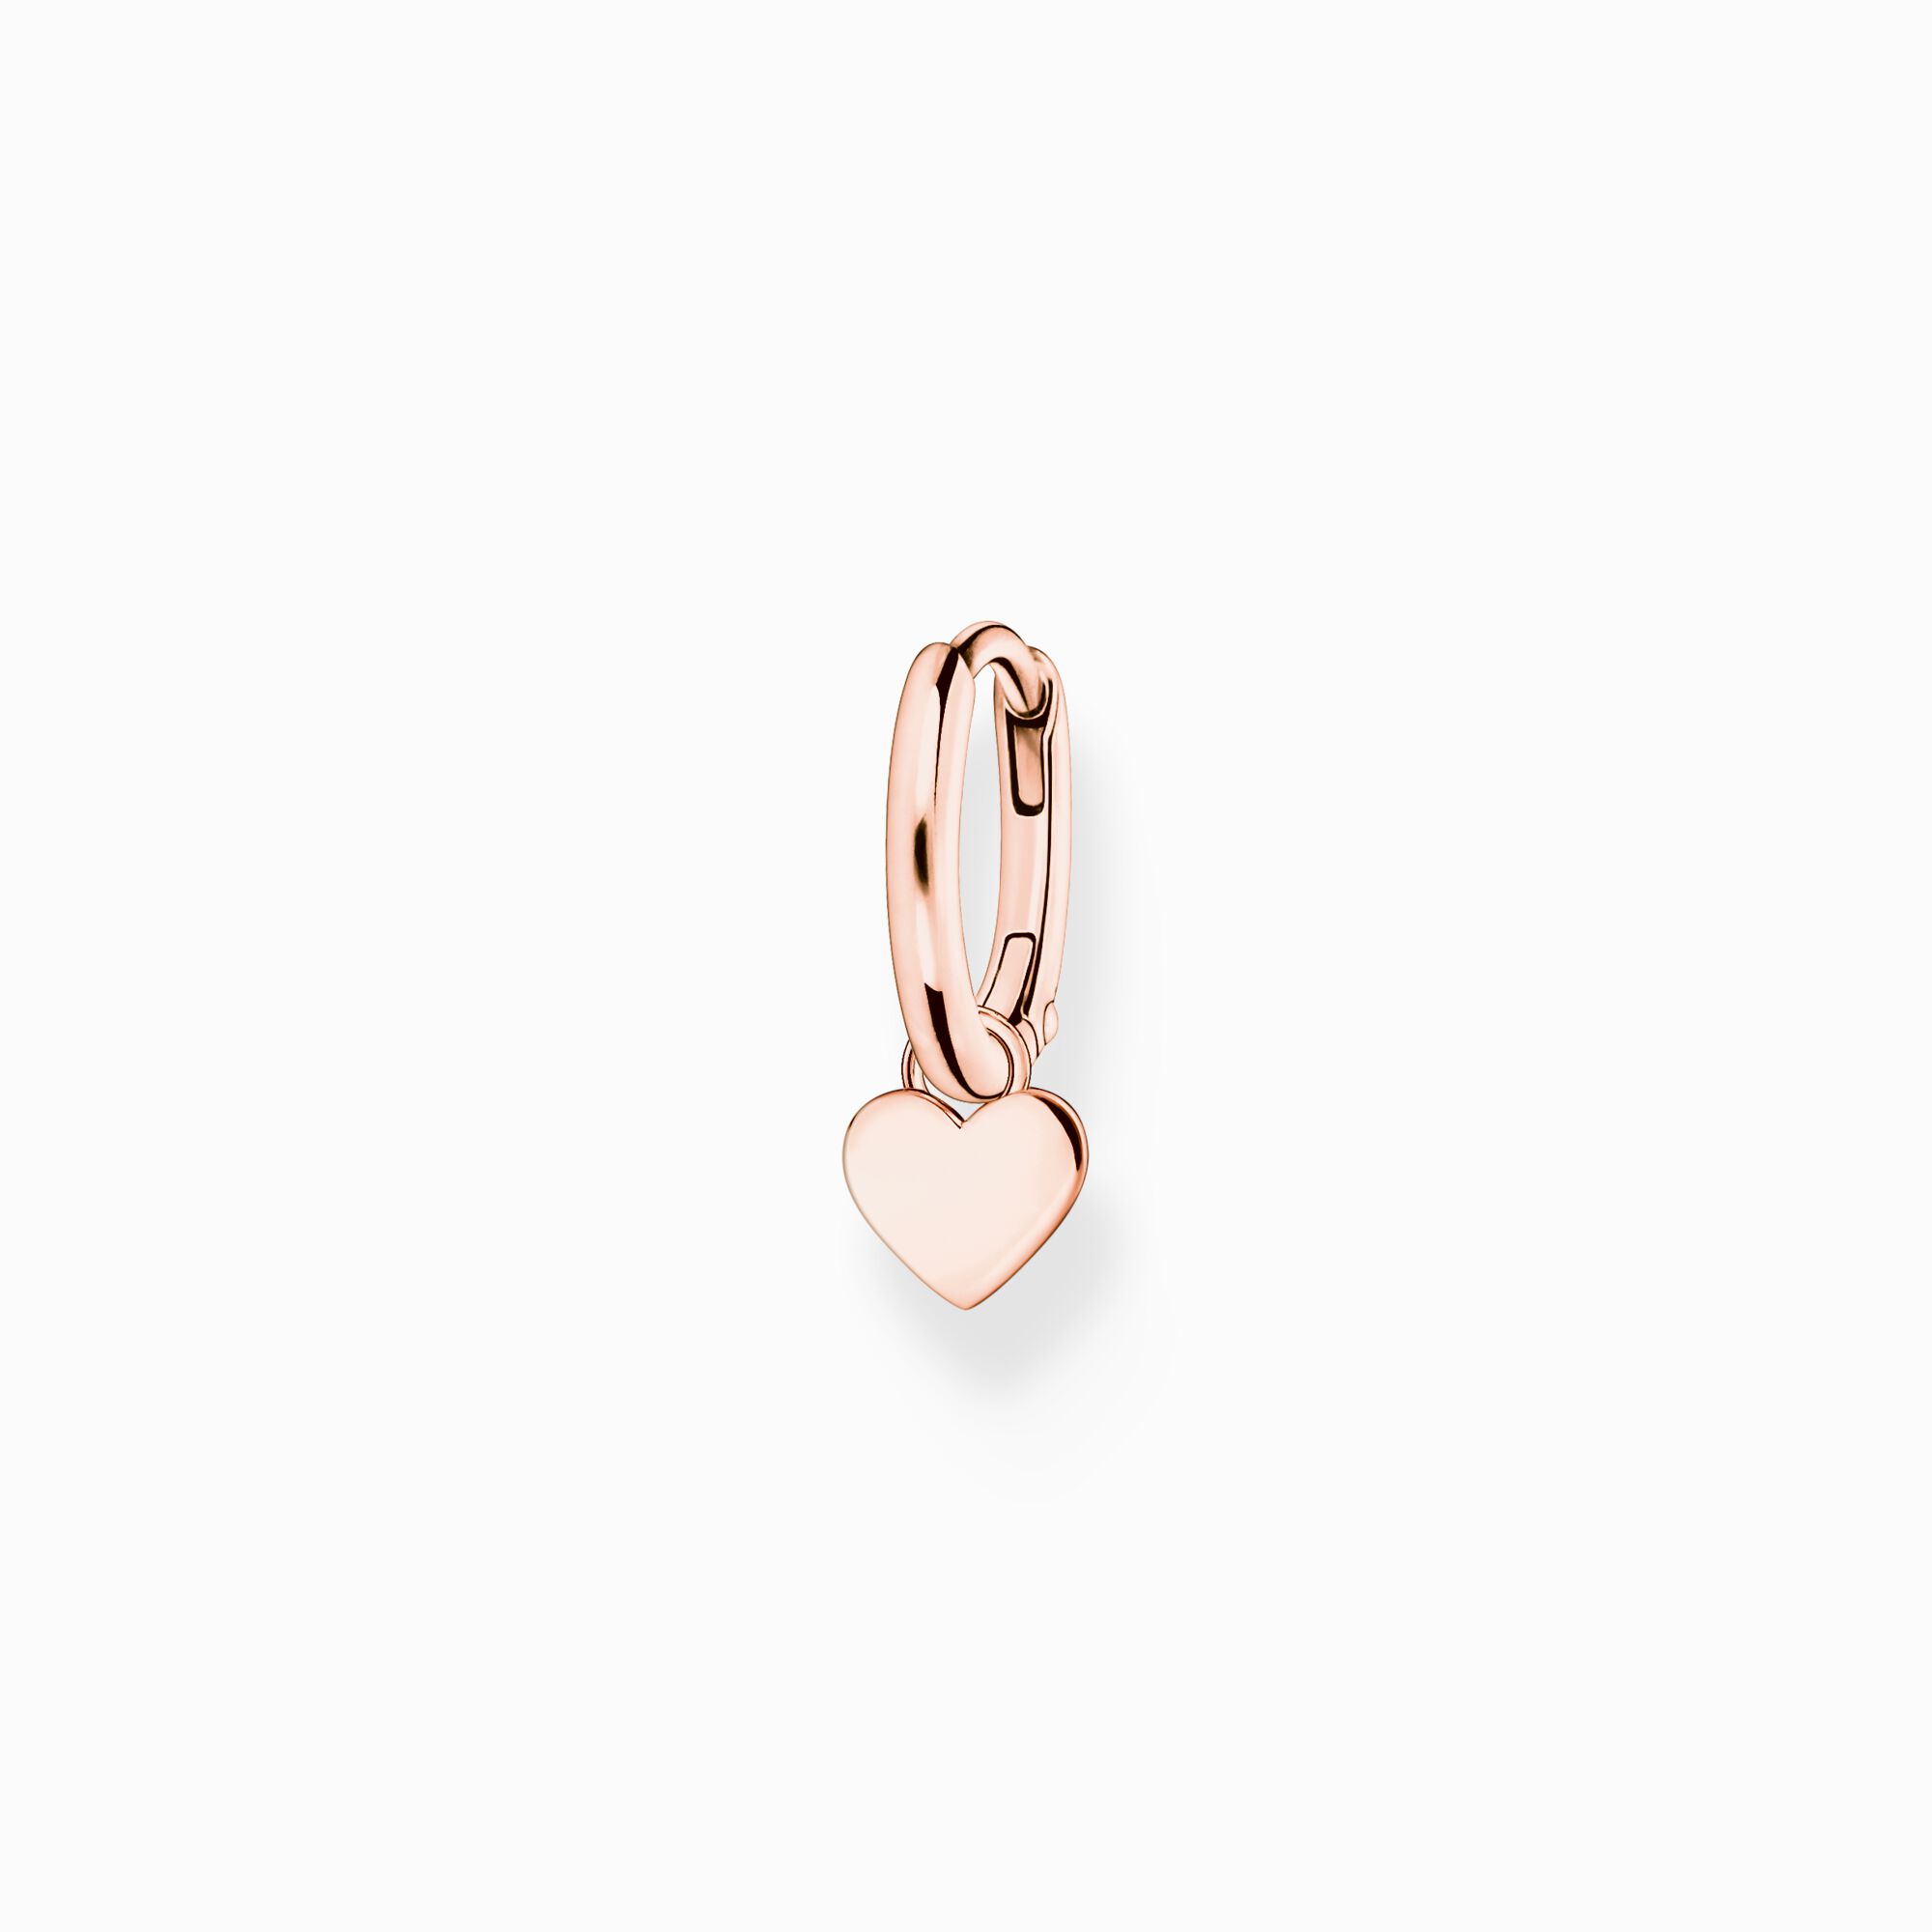 Single hoop earring with heart pendant rose gold from the Charming Collection collection in the THOMAS SABO online store